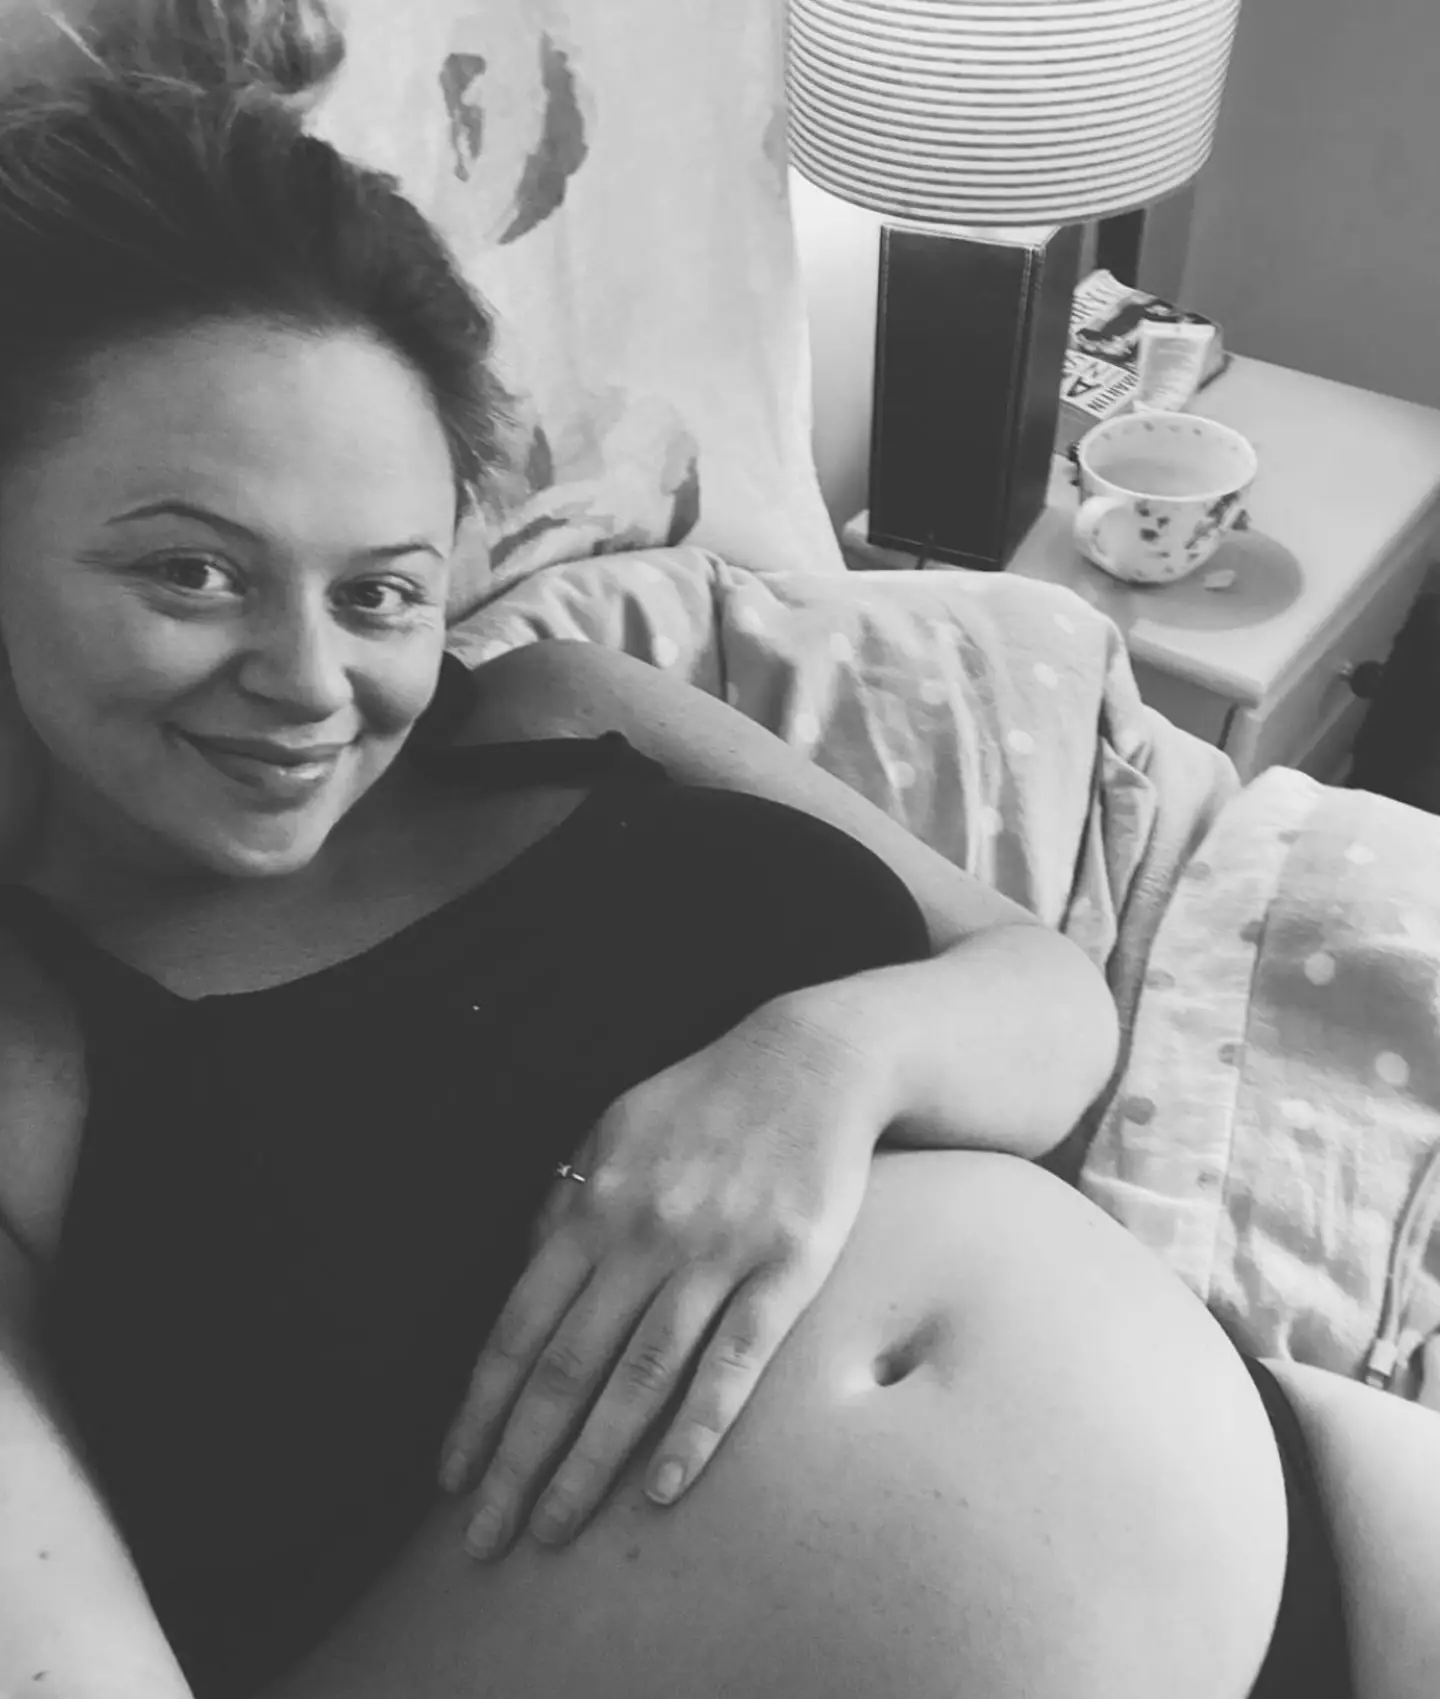 Emily Atack announced her pregnancy at the end of last year.